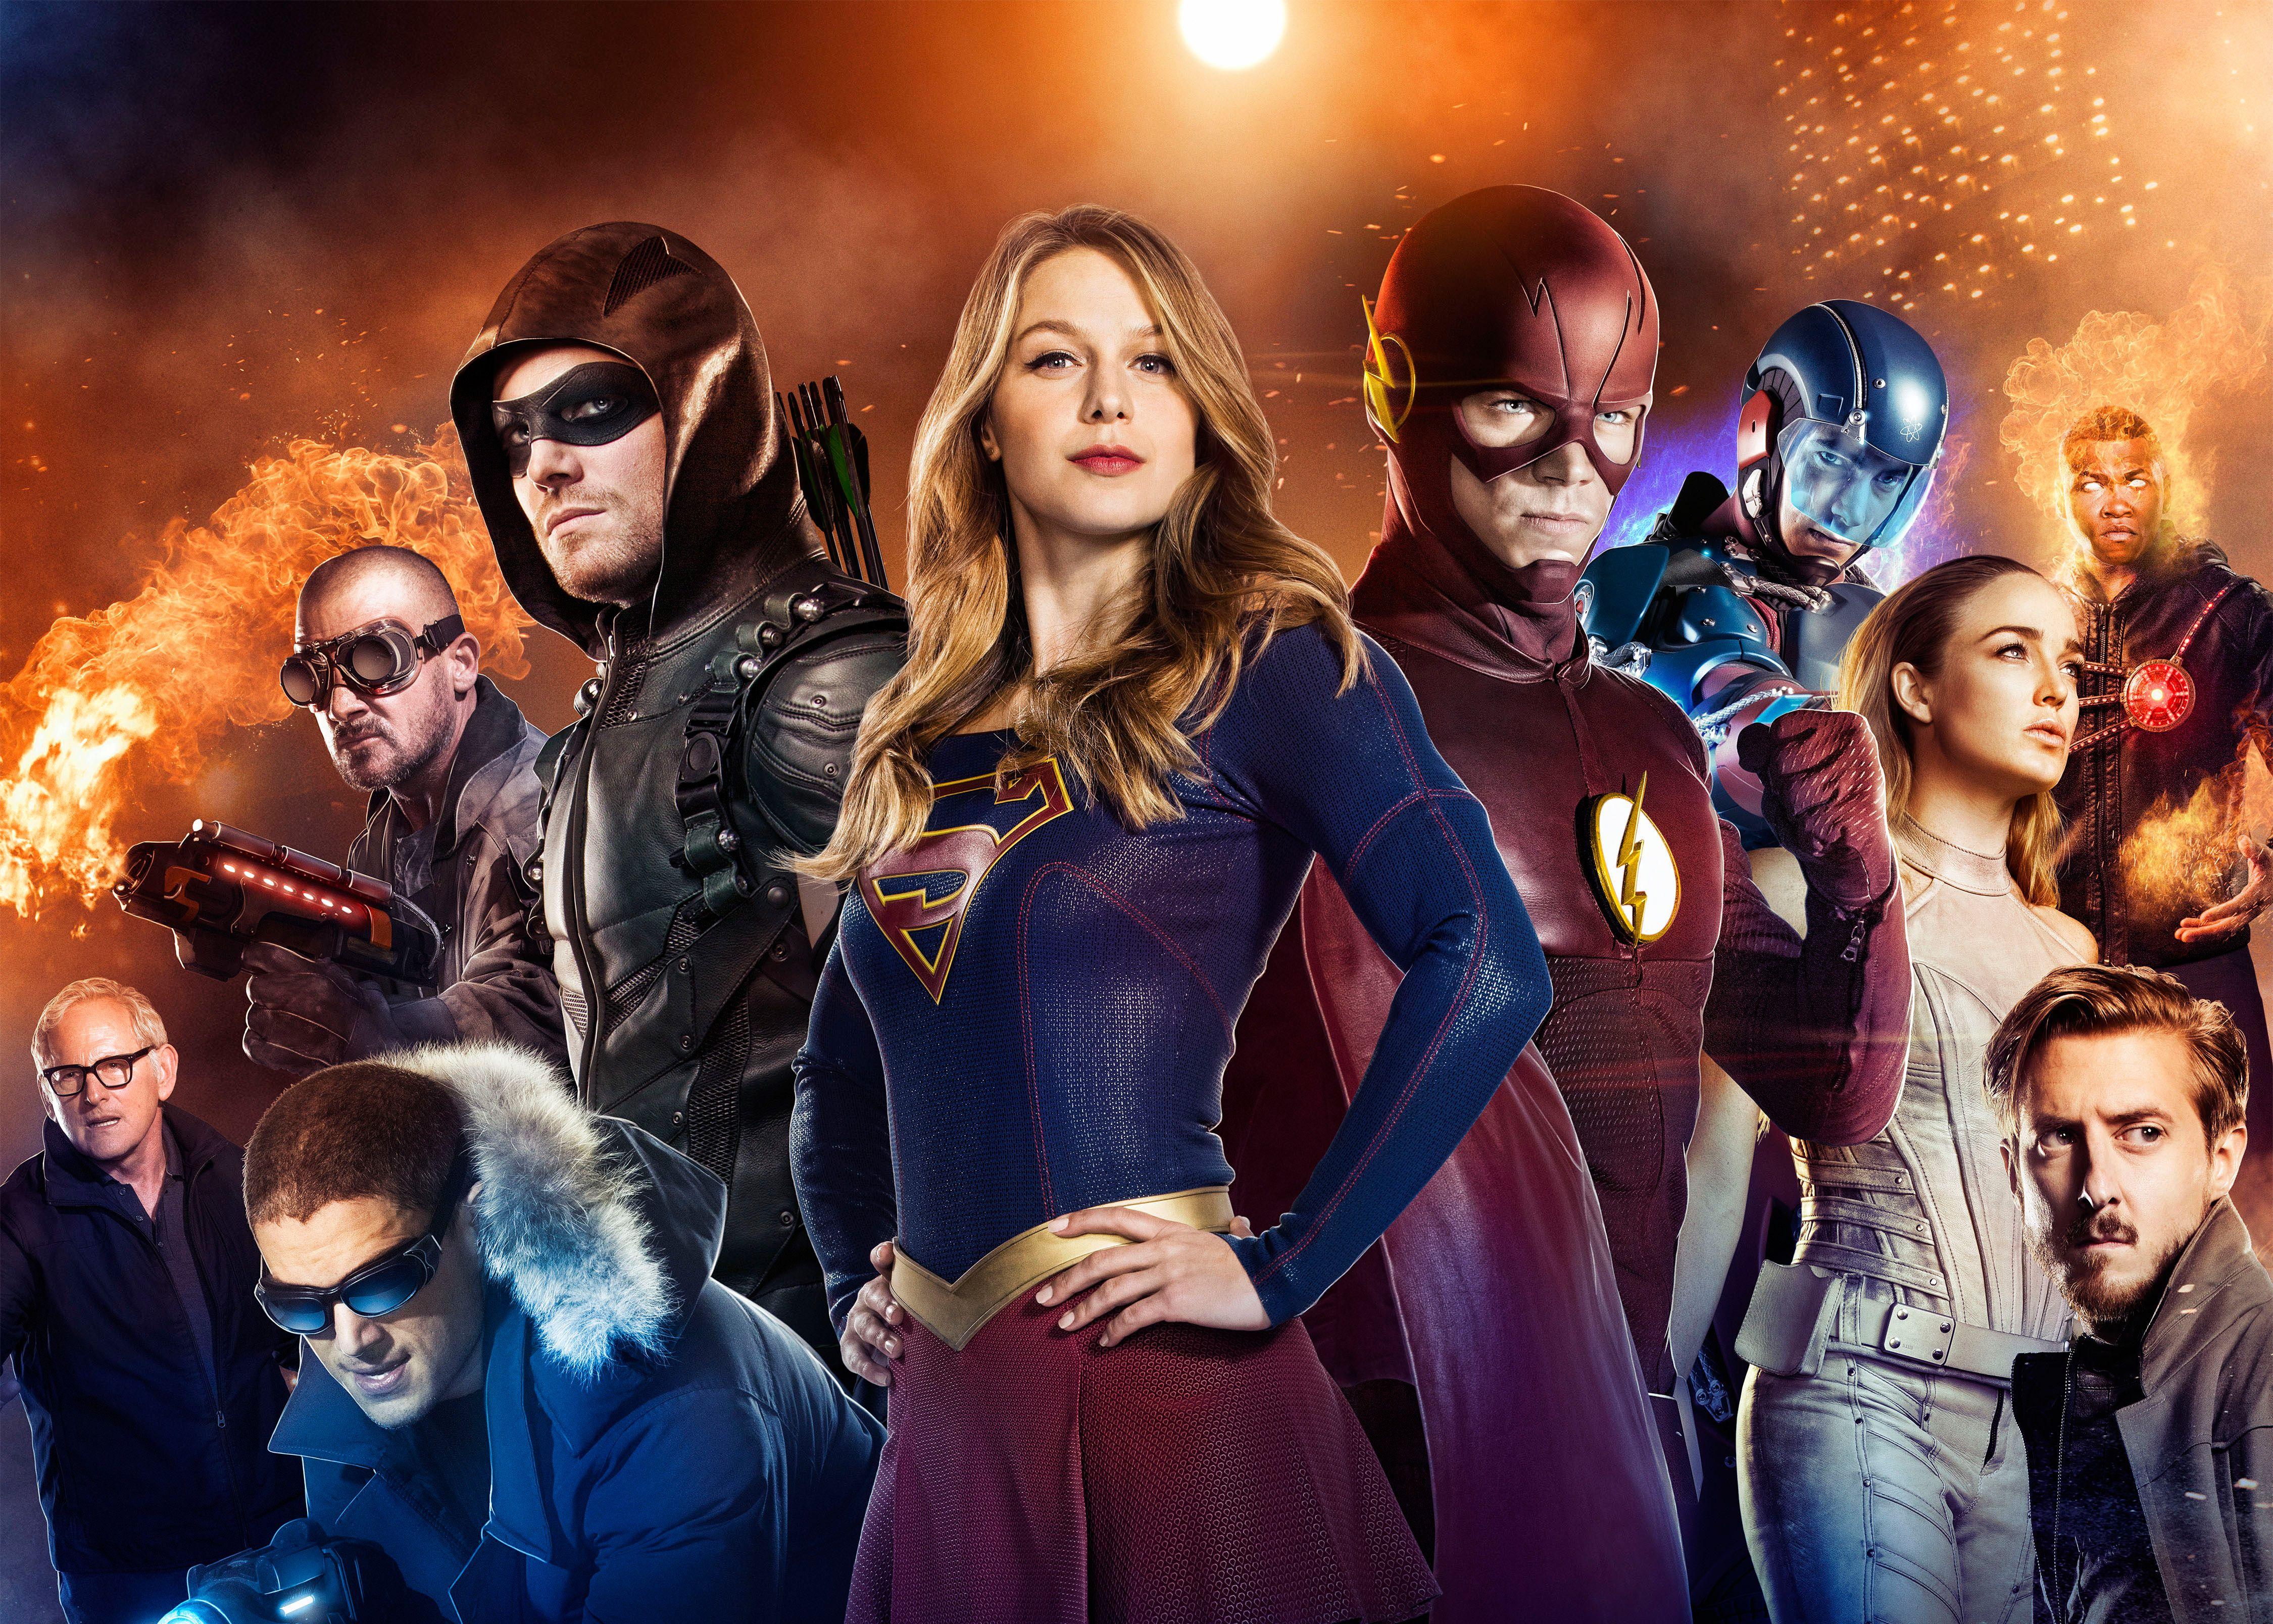 Arrowverse Wallpapers Wallpaper Cave Thousands of new arrows png image resources are added every day. arrowverse wallpapers wallpaper cave